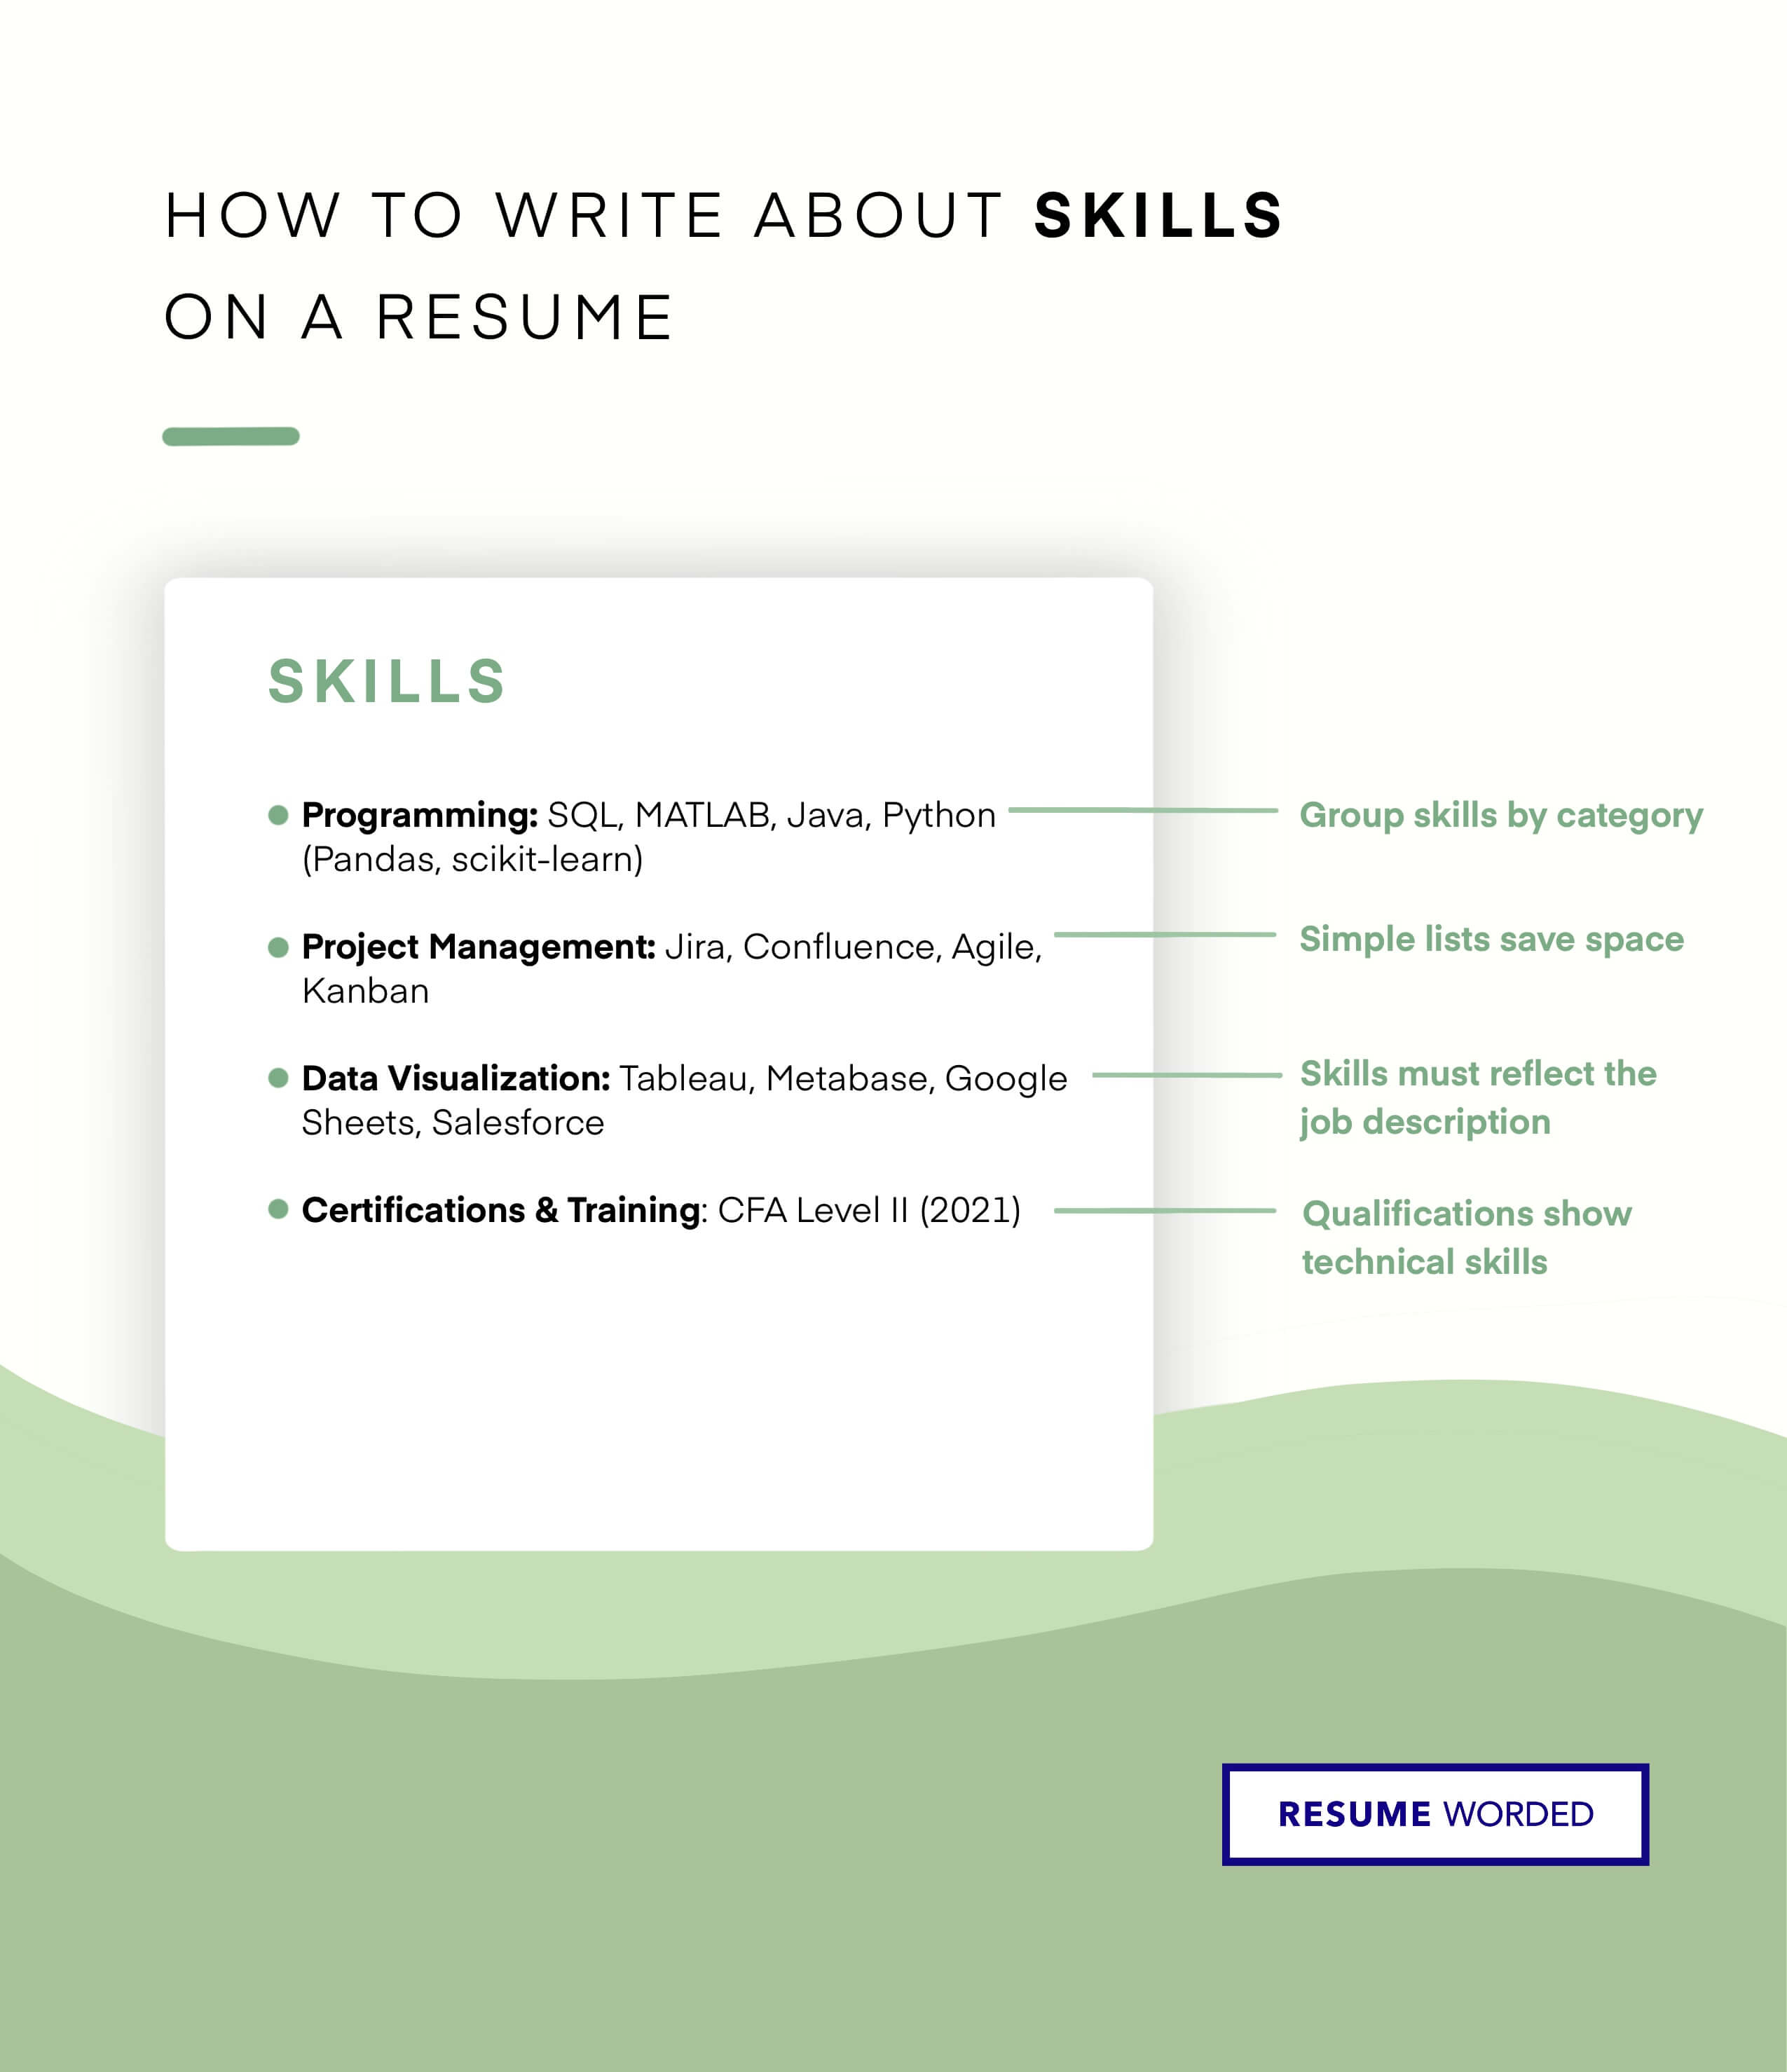 Use a concise and targeted skills list - Litigation Attorney Resume